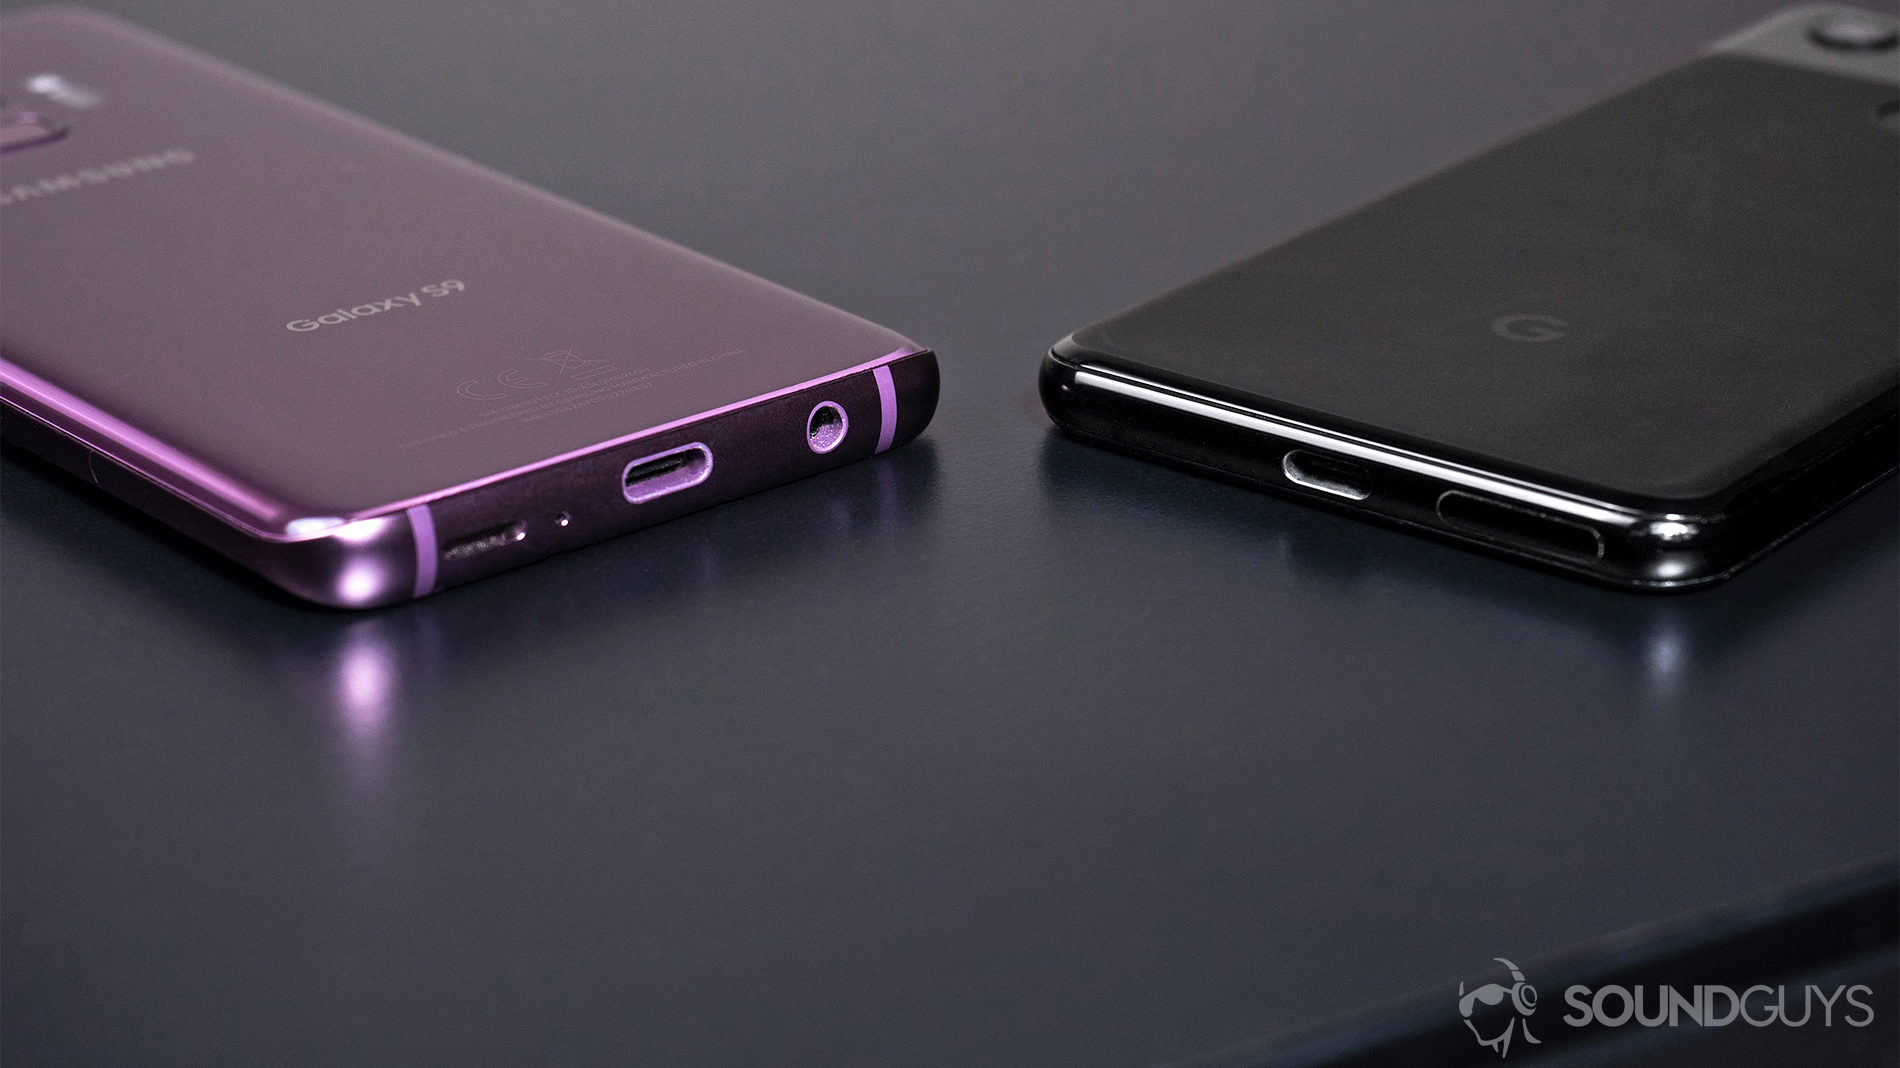 USB-C, headphone jack: Samsung S9 lilac and Google Pixel 3 with bases showing to reveal headphone jack and lack thereof.